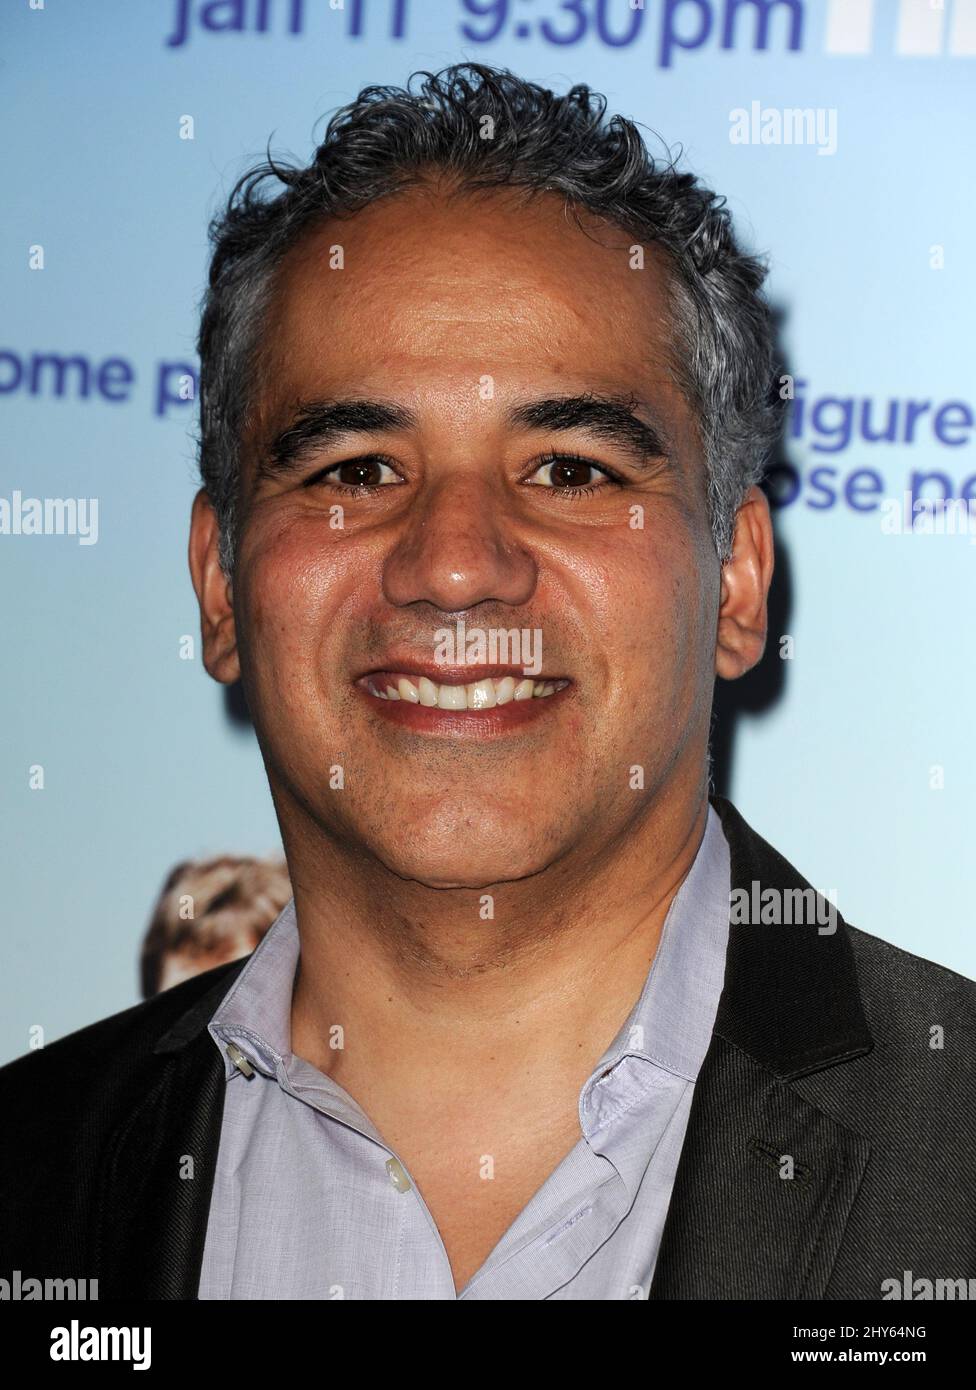 John Ortiz attending the premiere of 'Togetherness' Stock Photo